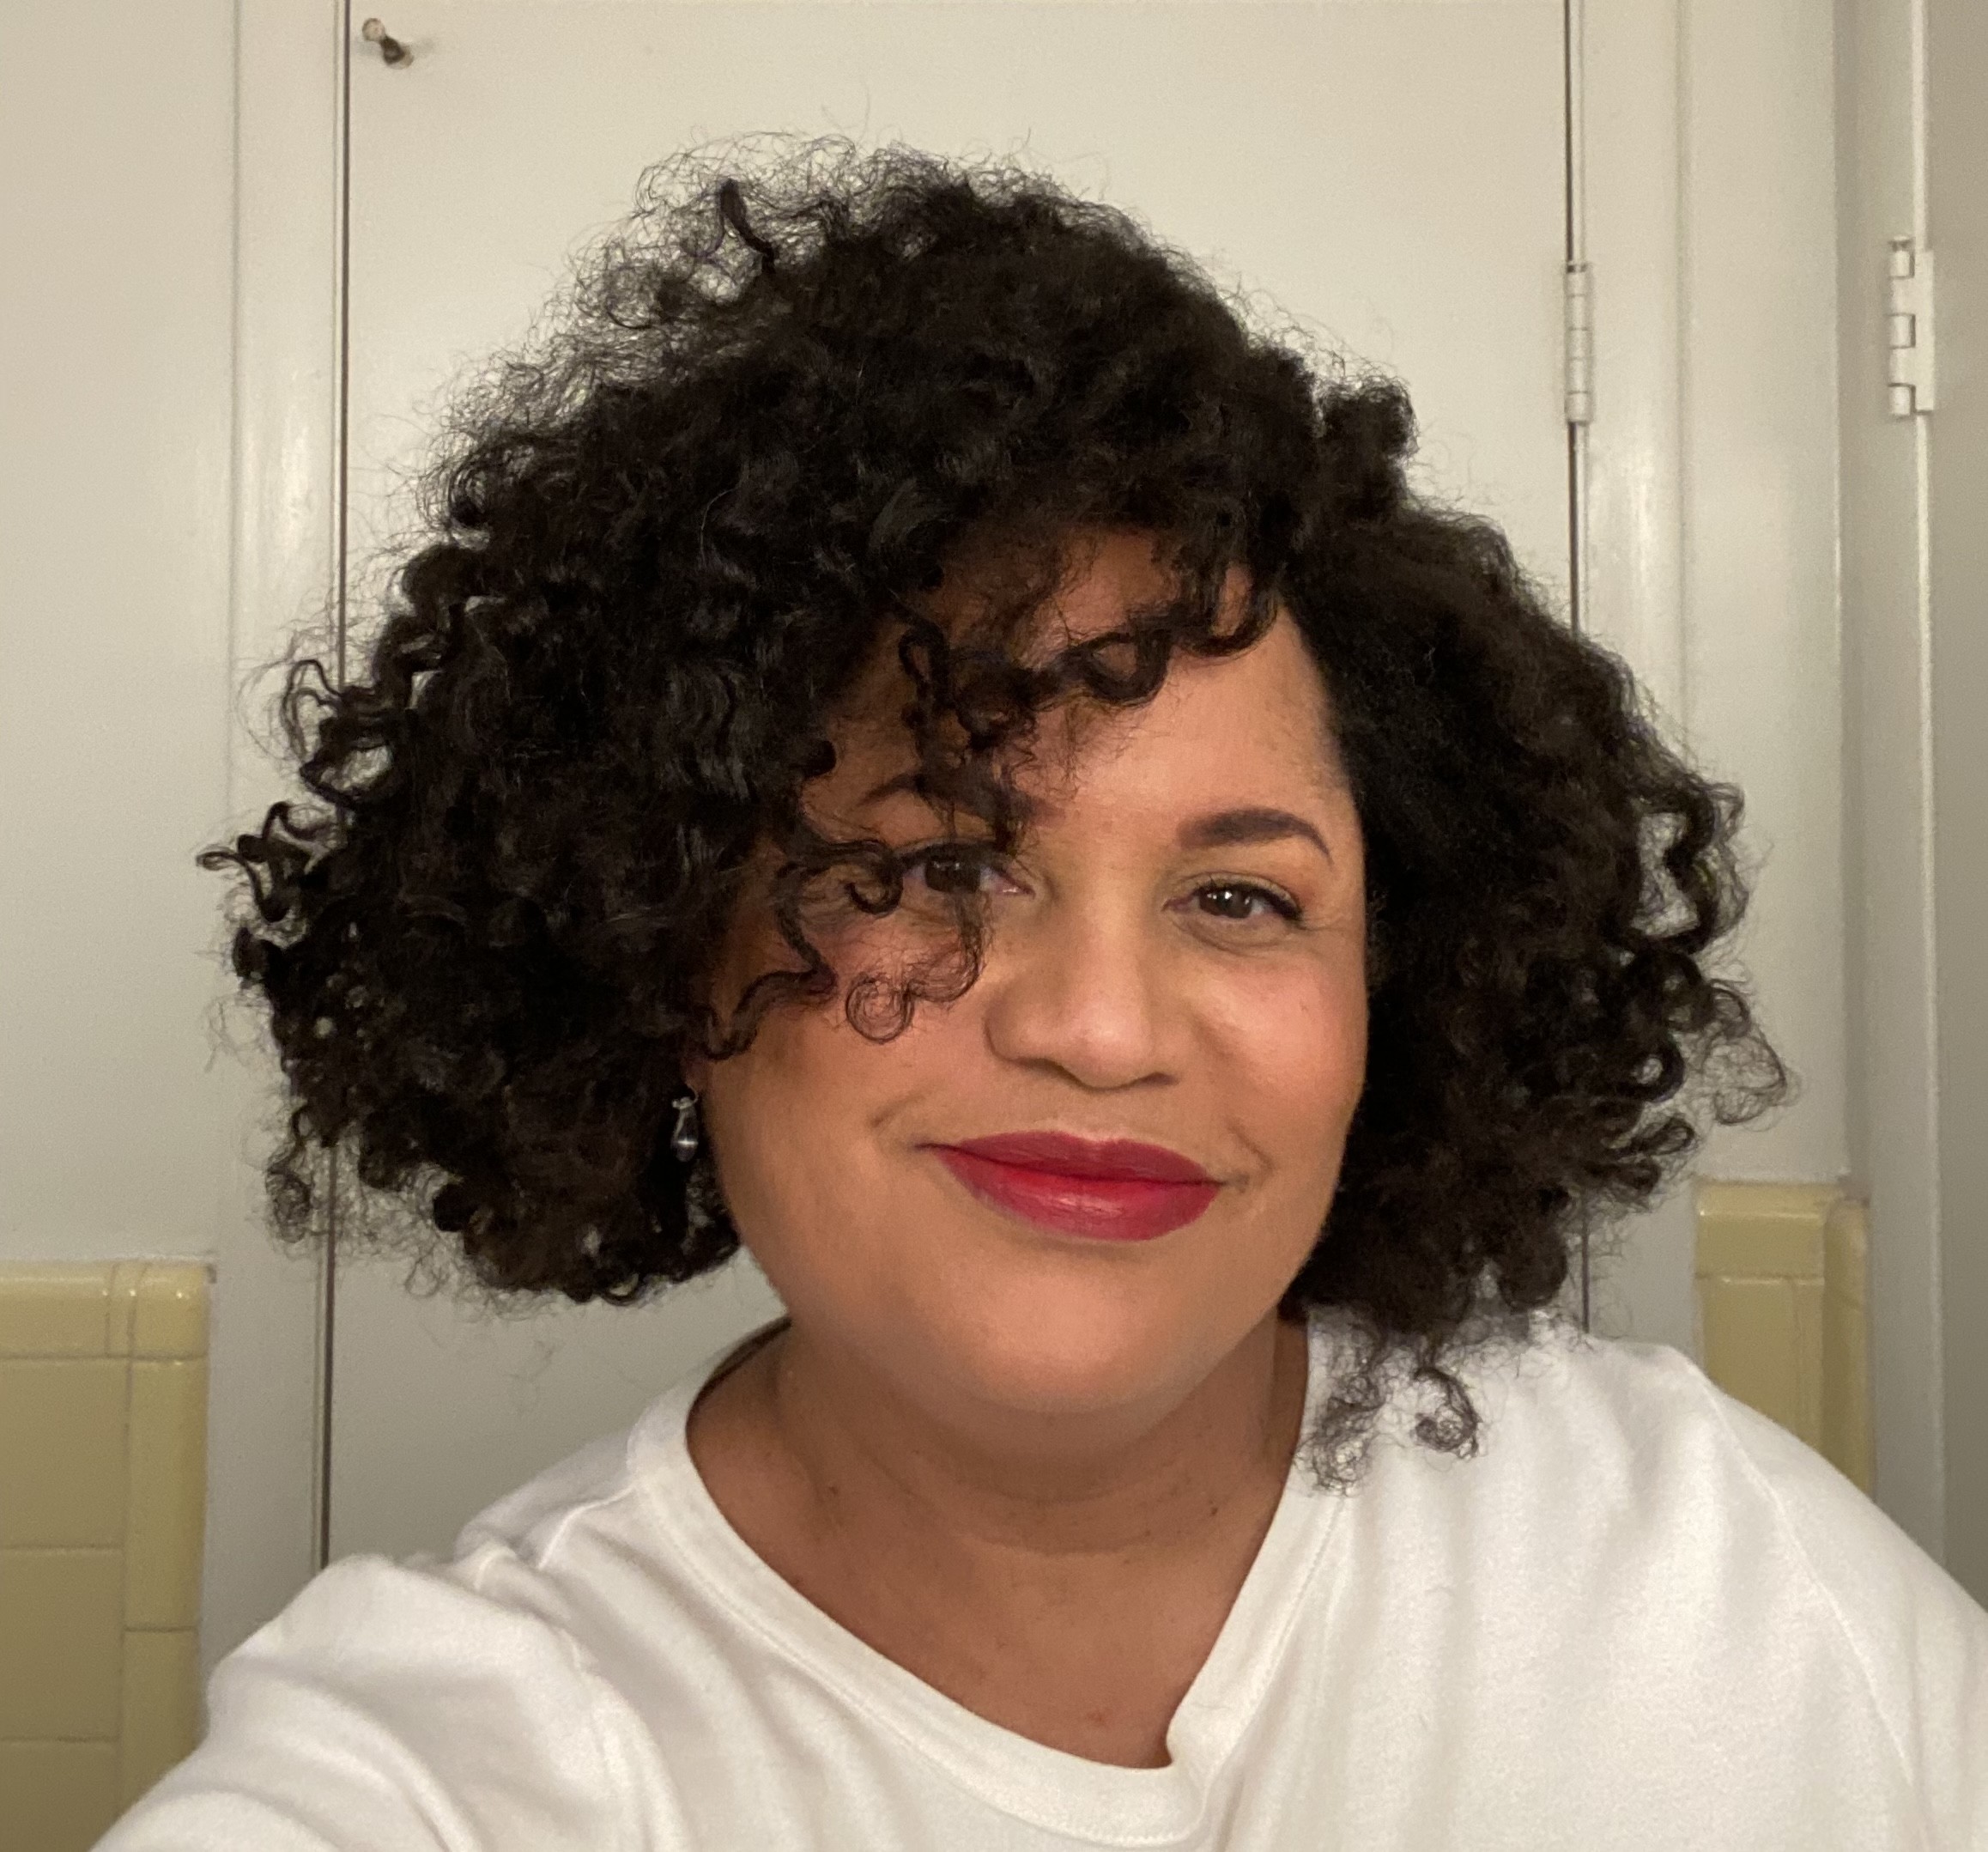 Angela Fields, Creator of CurlyCoilyTresses